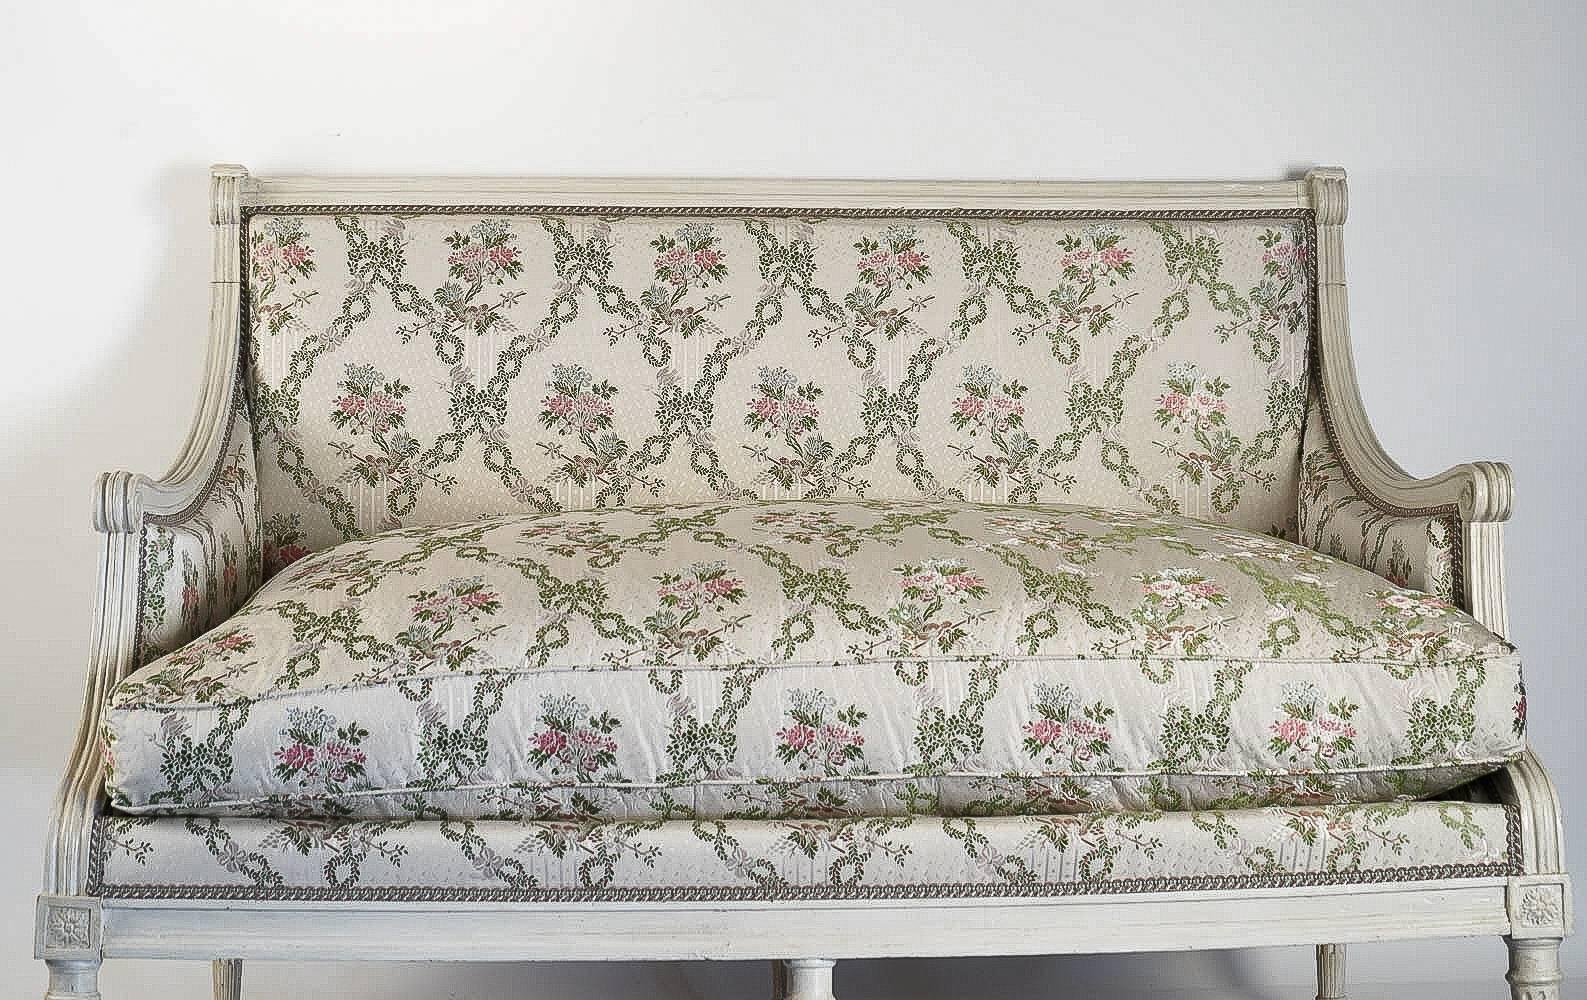 French Attributed to Georges Jacob circa 1780, Sofa Late 18th Century Louis XVI Period